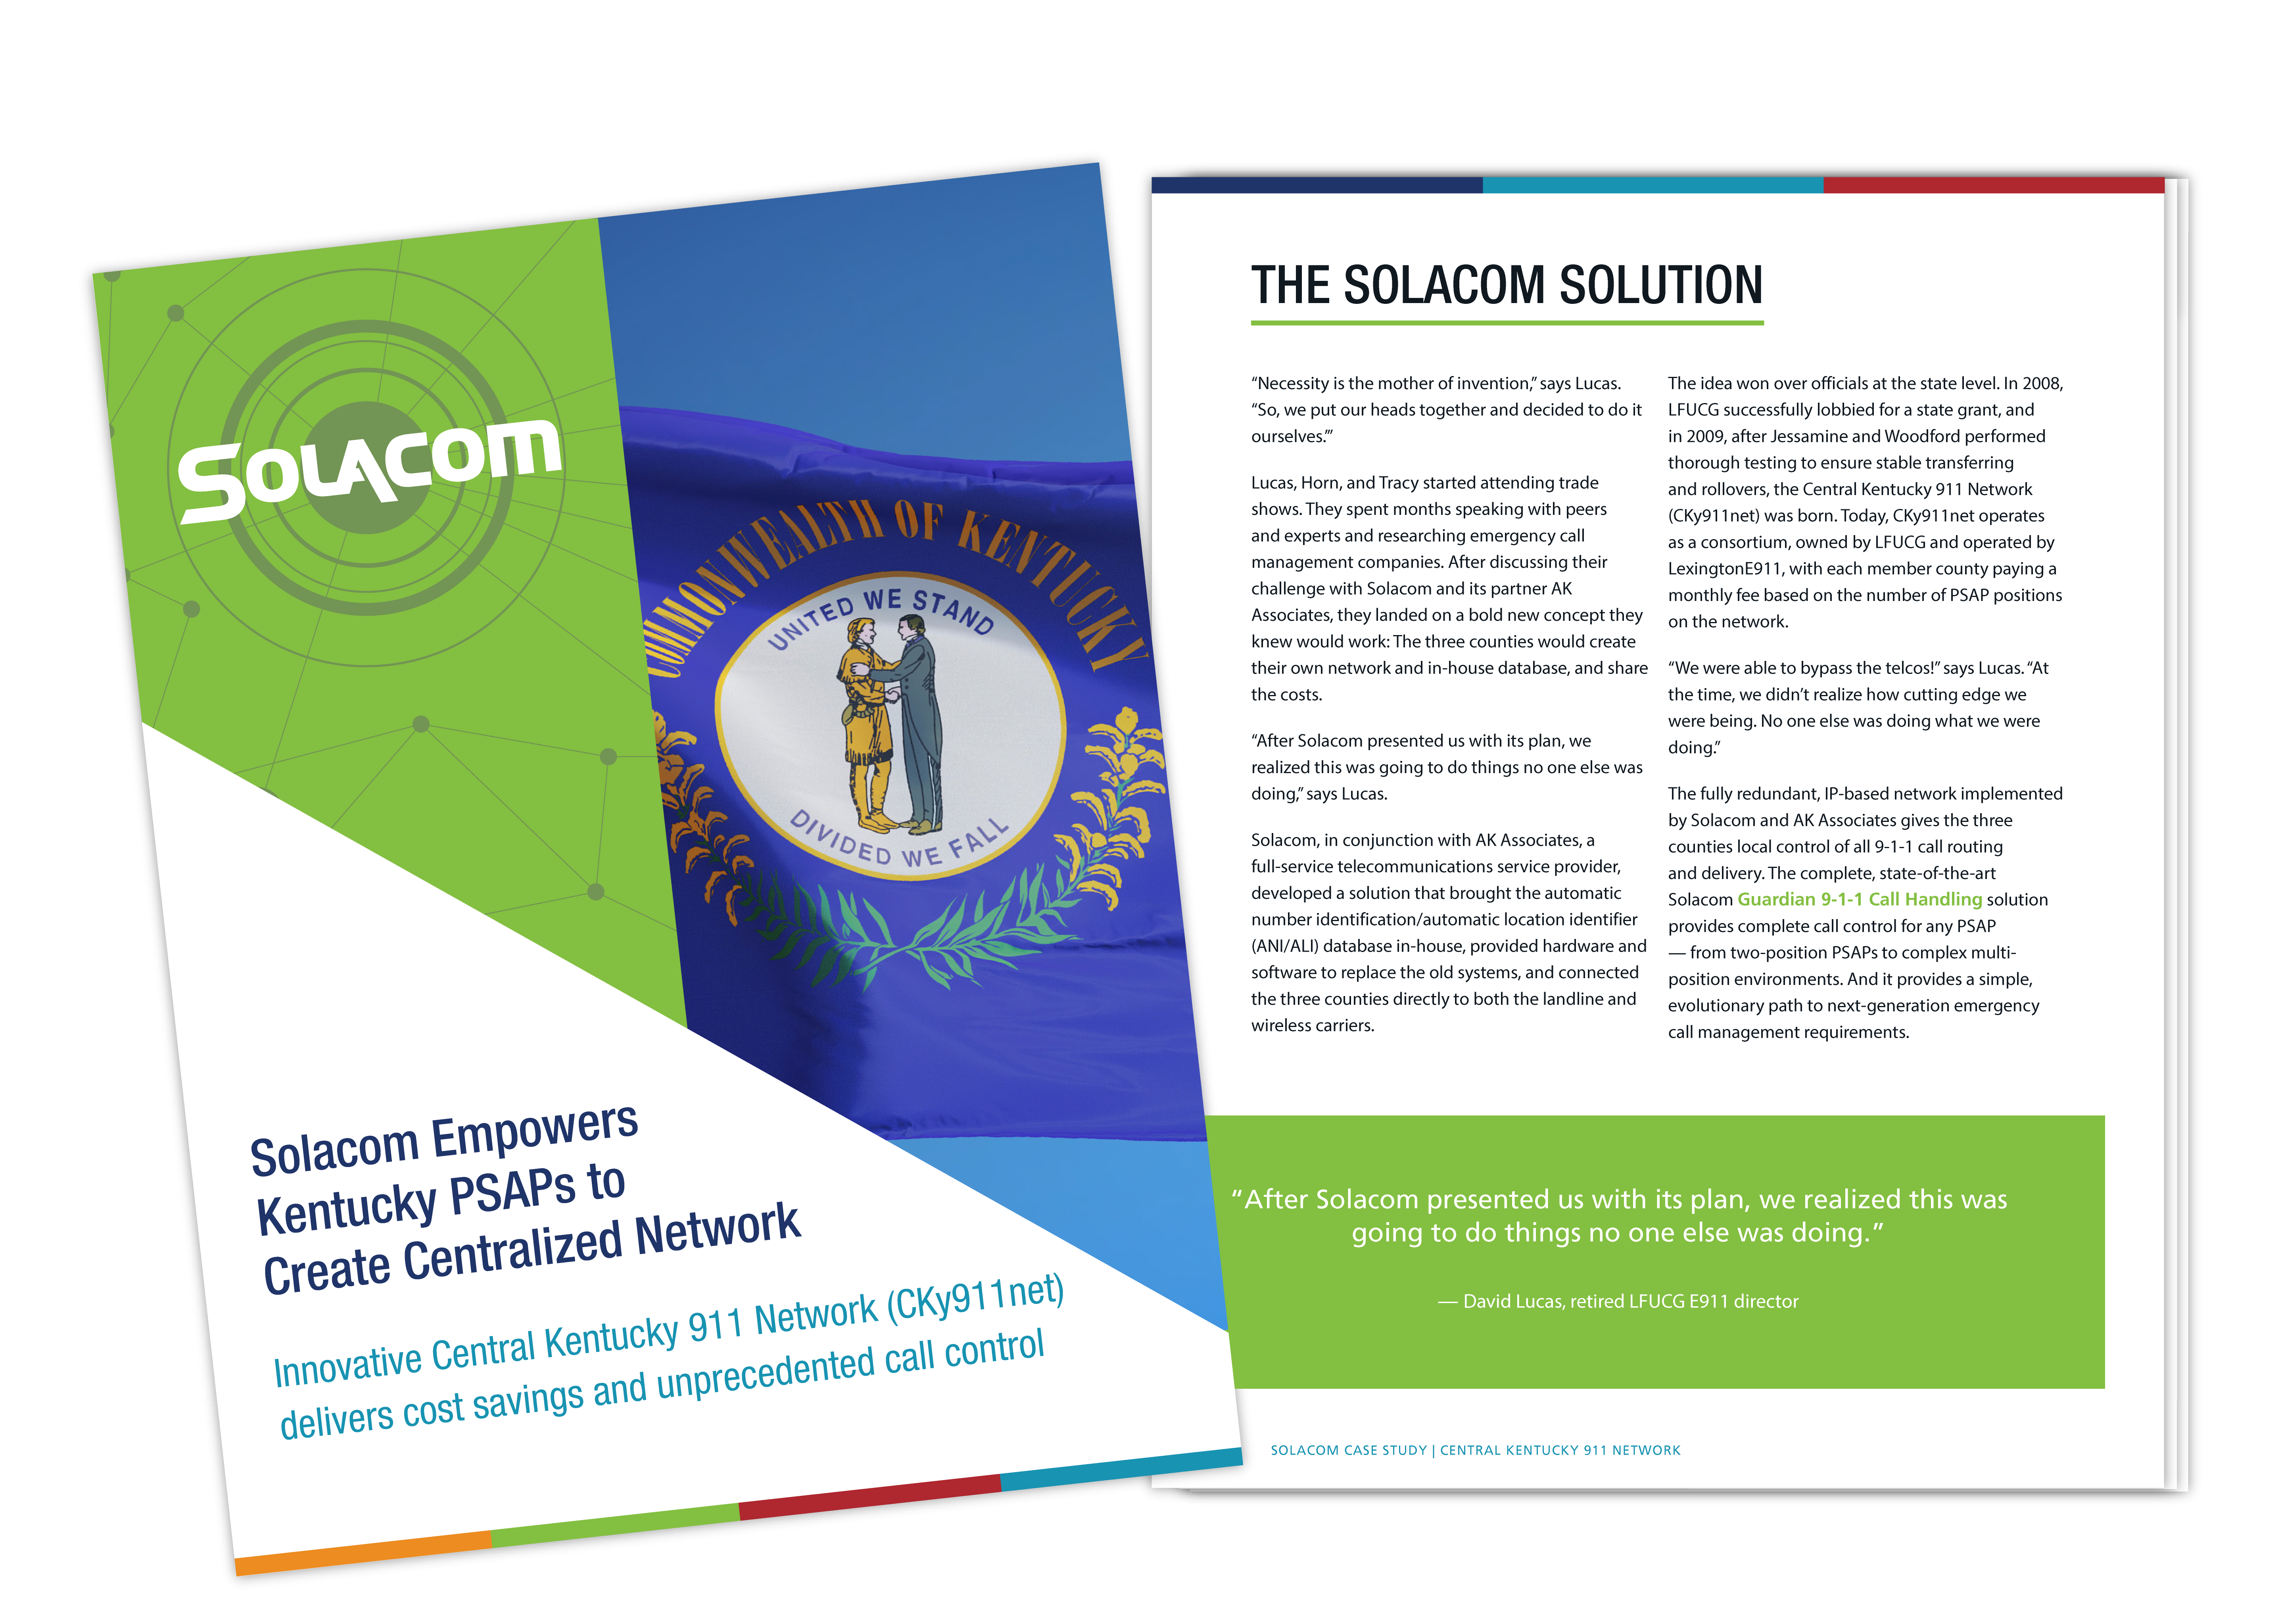 Solacom Delivers Cost Savings and Call Control to Central Kentucky Network, a Solacom case study